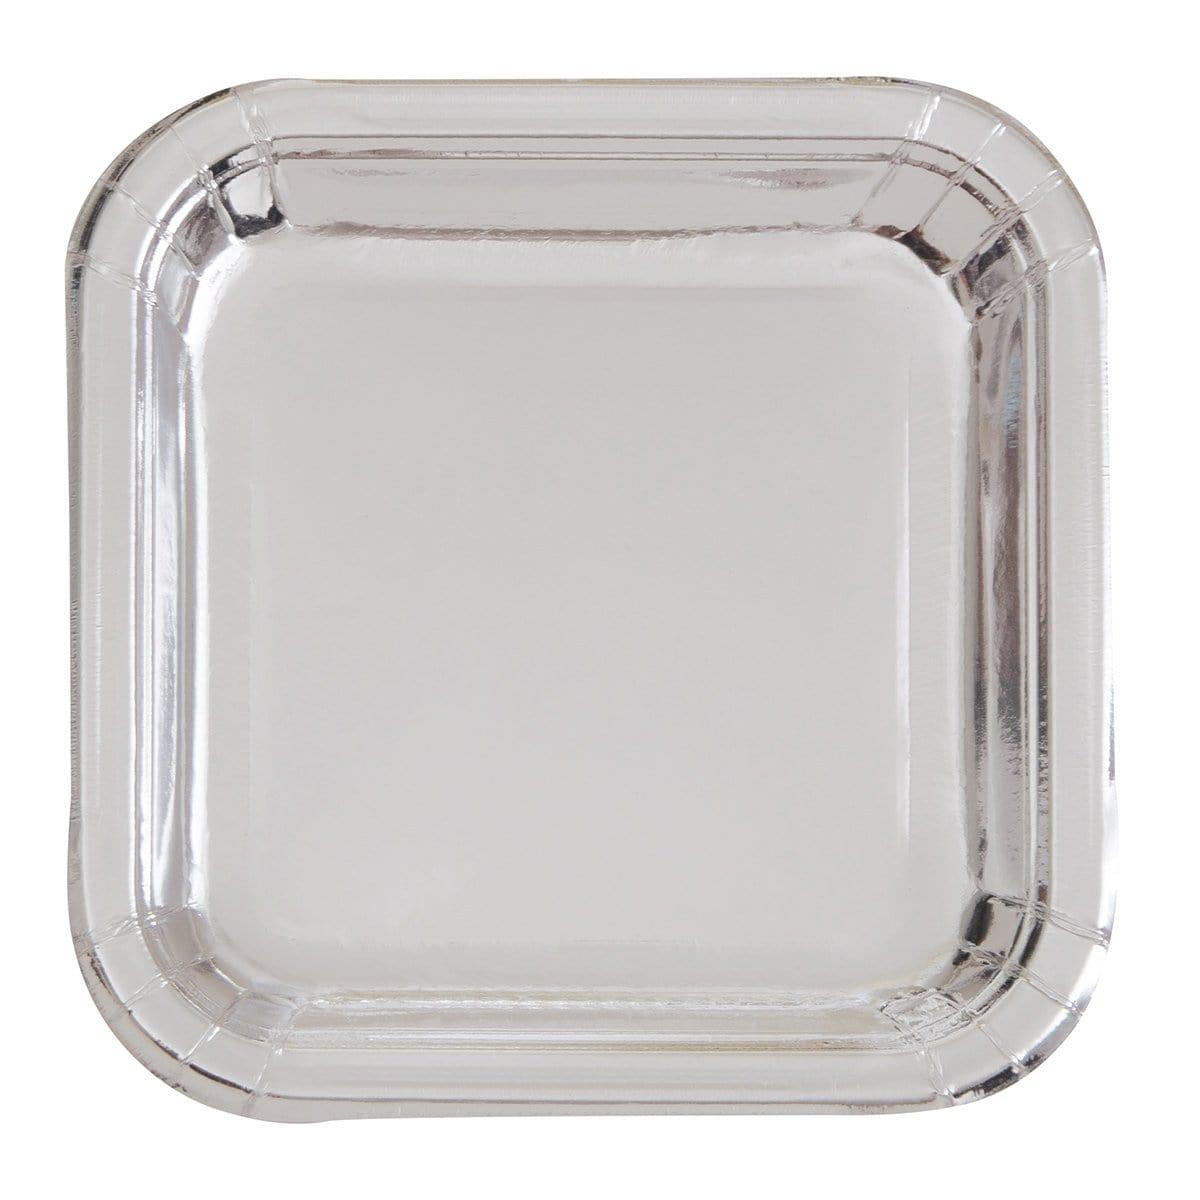 Buy Plasticware Square Plates 9 In. 8/pkg.- Silver sold at Party Expert